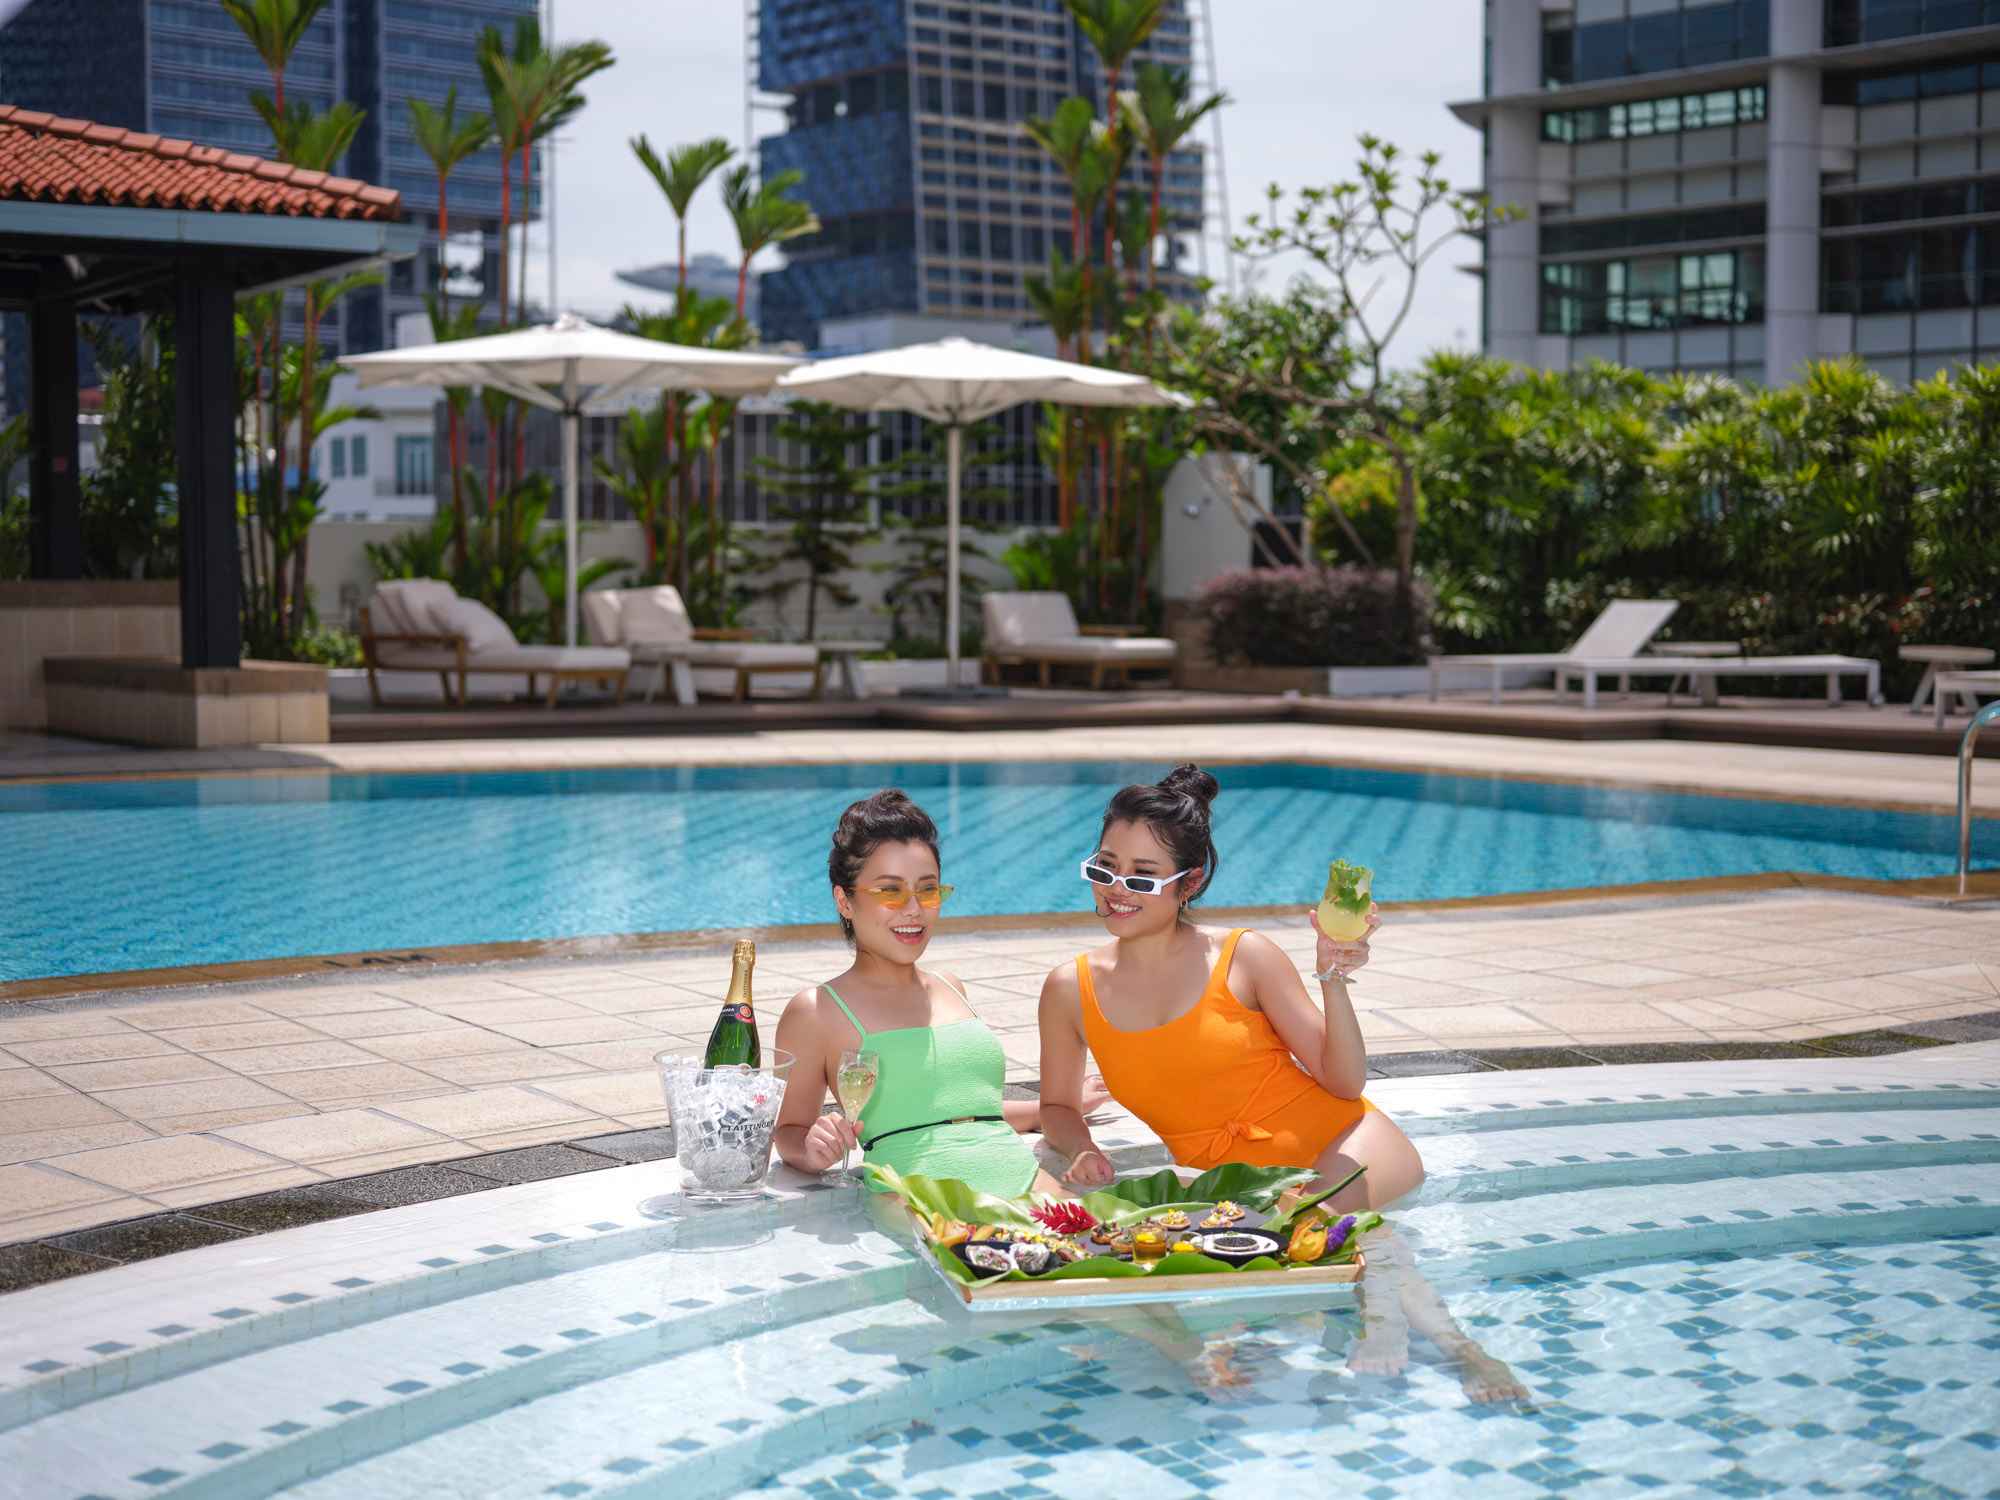 2 ladies chilling at the swimming pool at intercontinental hotel with drinks and food - hotel photography